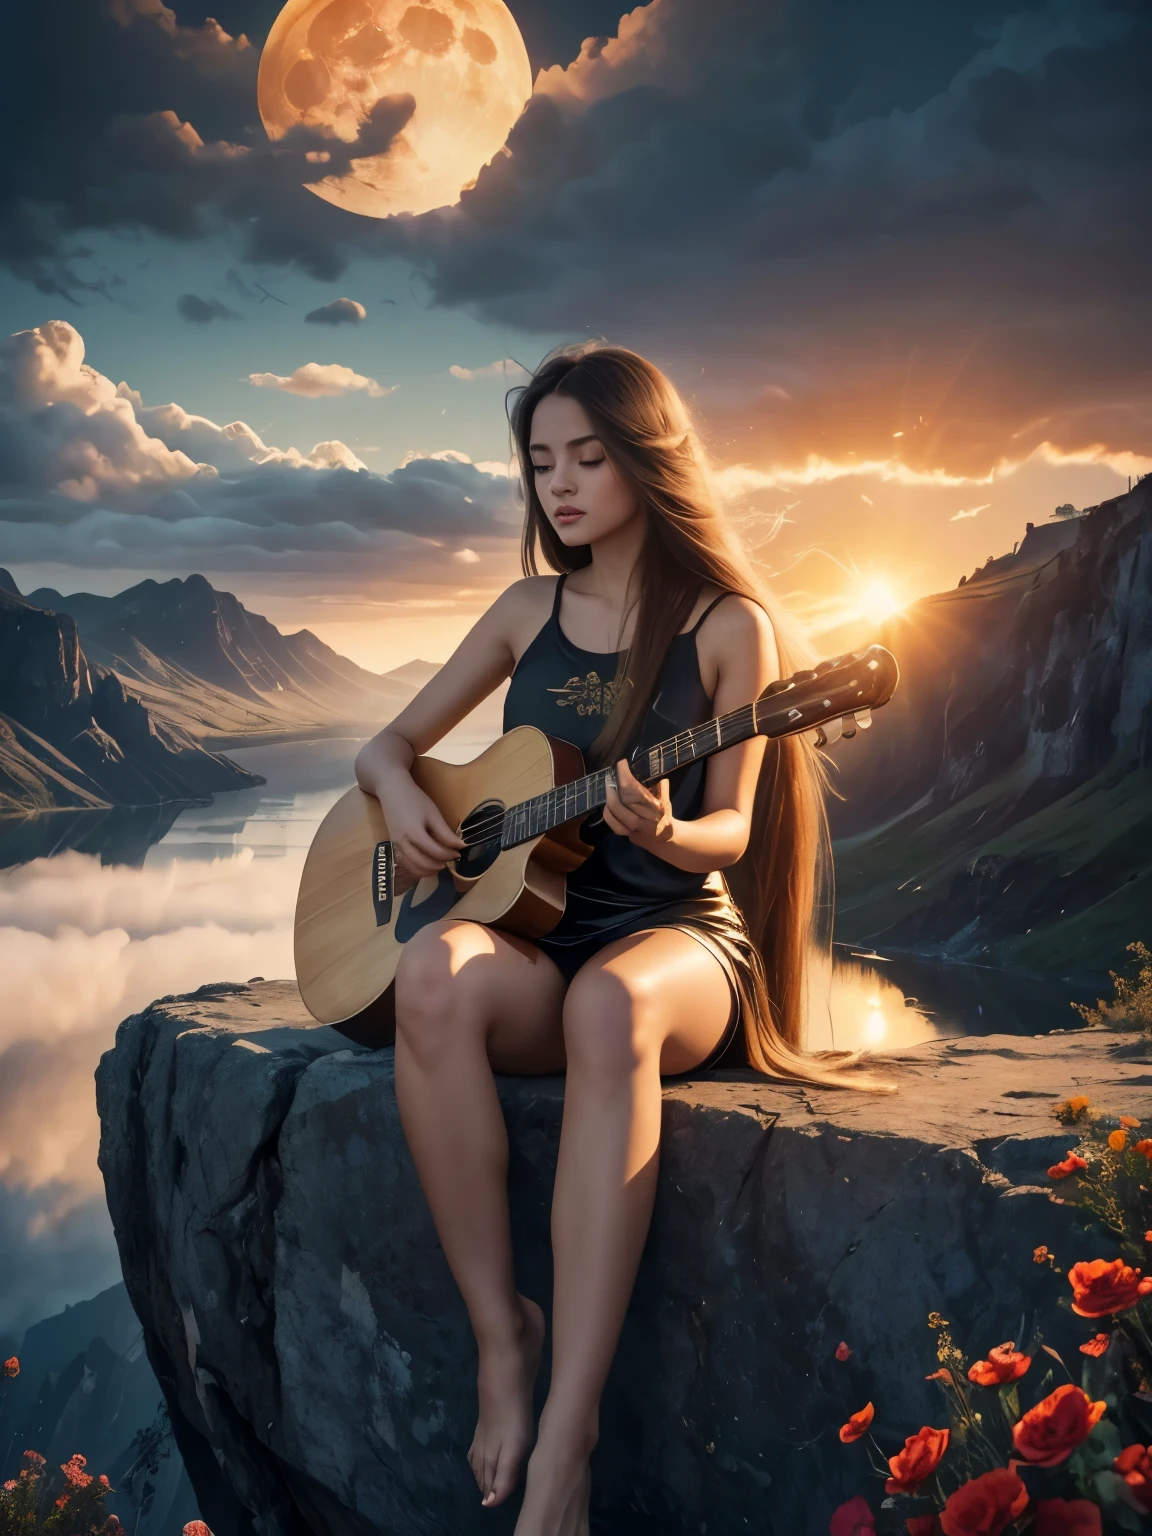 abstract painting art, 8k poster, full body, golden flowers, beautiful girl sitting on the edge of the cliff observing the distant horizon, golden eyes, garden, golden eyes, long hair blown by the wind, front view of female body, bronze hair metallic, red cloud sunset, night light, depth of valley seen from above with a lake and distant mountains, abstract oil painting, a girl well focused on the scene, (((girl plays guitar))), overexposure, overexposure art, surreal art, fantasy, abstract art of a woman in a mountain landscape, 8k poster, full body, gold and silver flowers, evening light, (((girl plays guitar))), (((giant full moon next to the sun, ))), (((musical signs in the clouds))), ((((long hair loose in the air, abstract hair molded into musical symbols, musical score thrown into the clouds, surreal art)))), high 8k resolution poster, gold and silver butterflies, ((short dress, tank top)), ((transparent t-shirt)), ((mini skirt)), ((bare feet) )), ((bare feet) )),